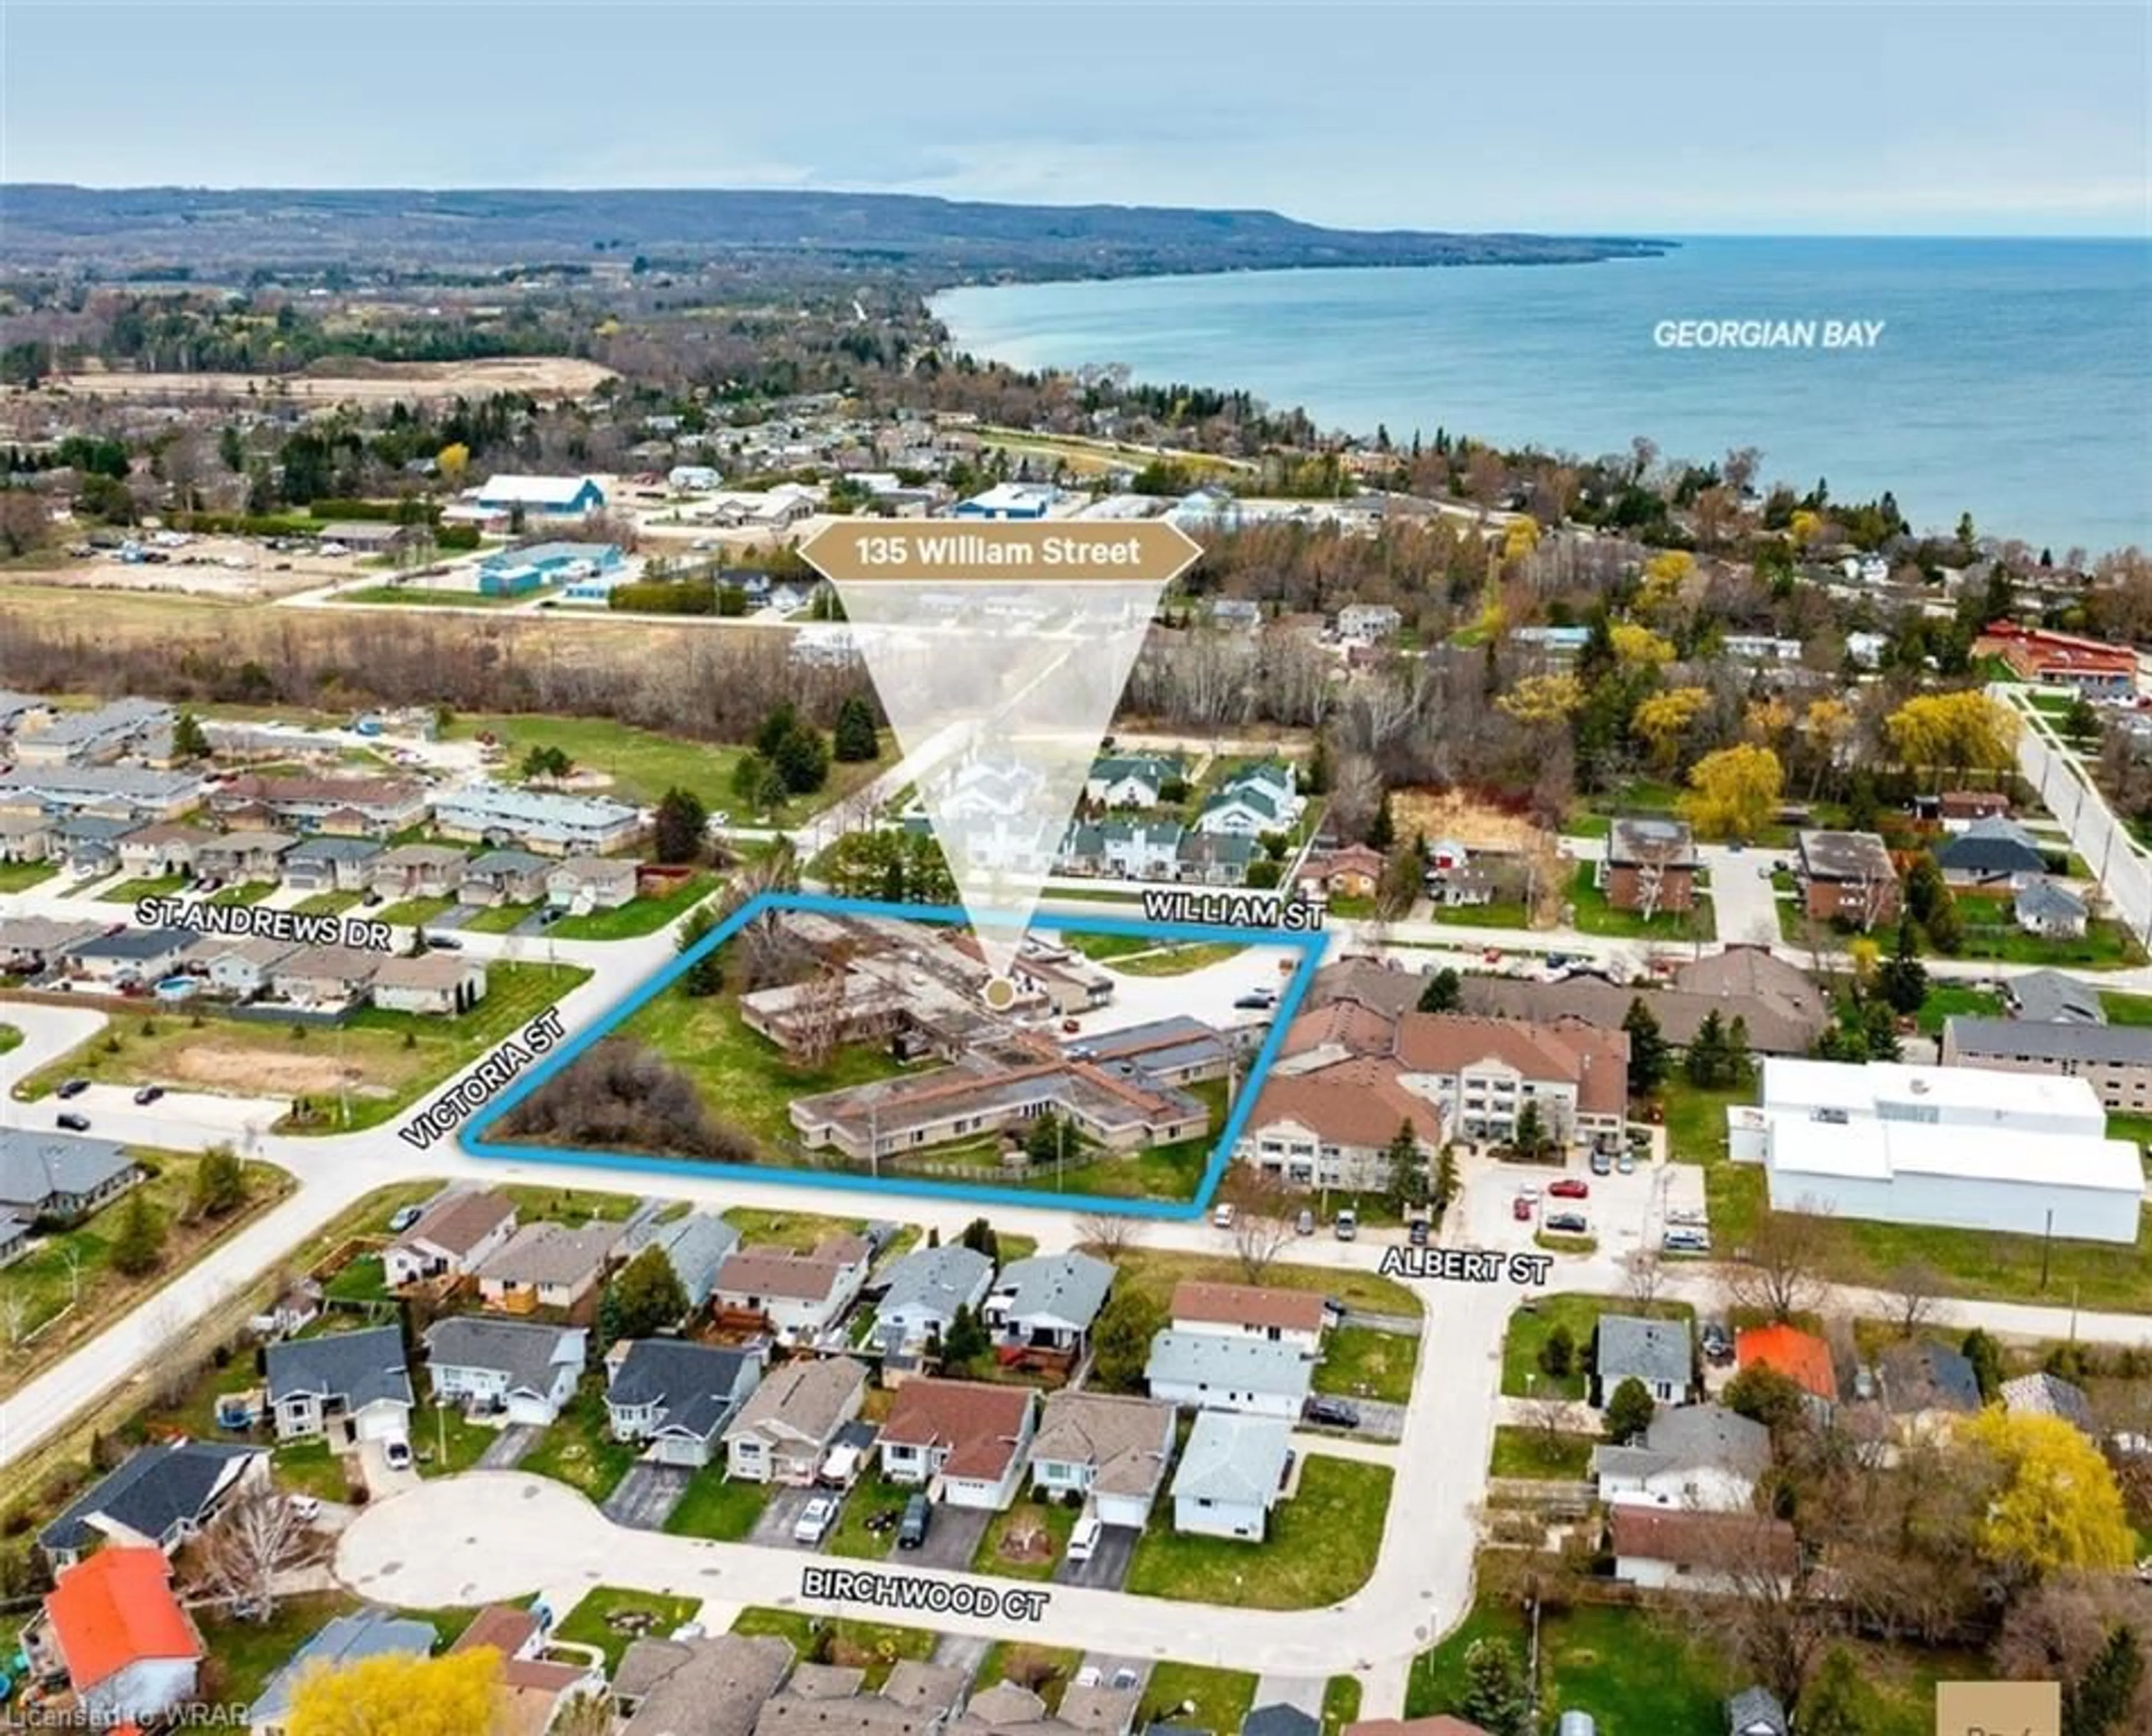 Lakeview for 135 William St, Meaford Ontario N4L 1T4